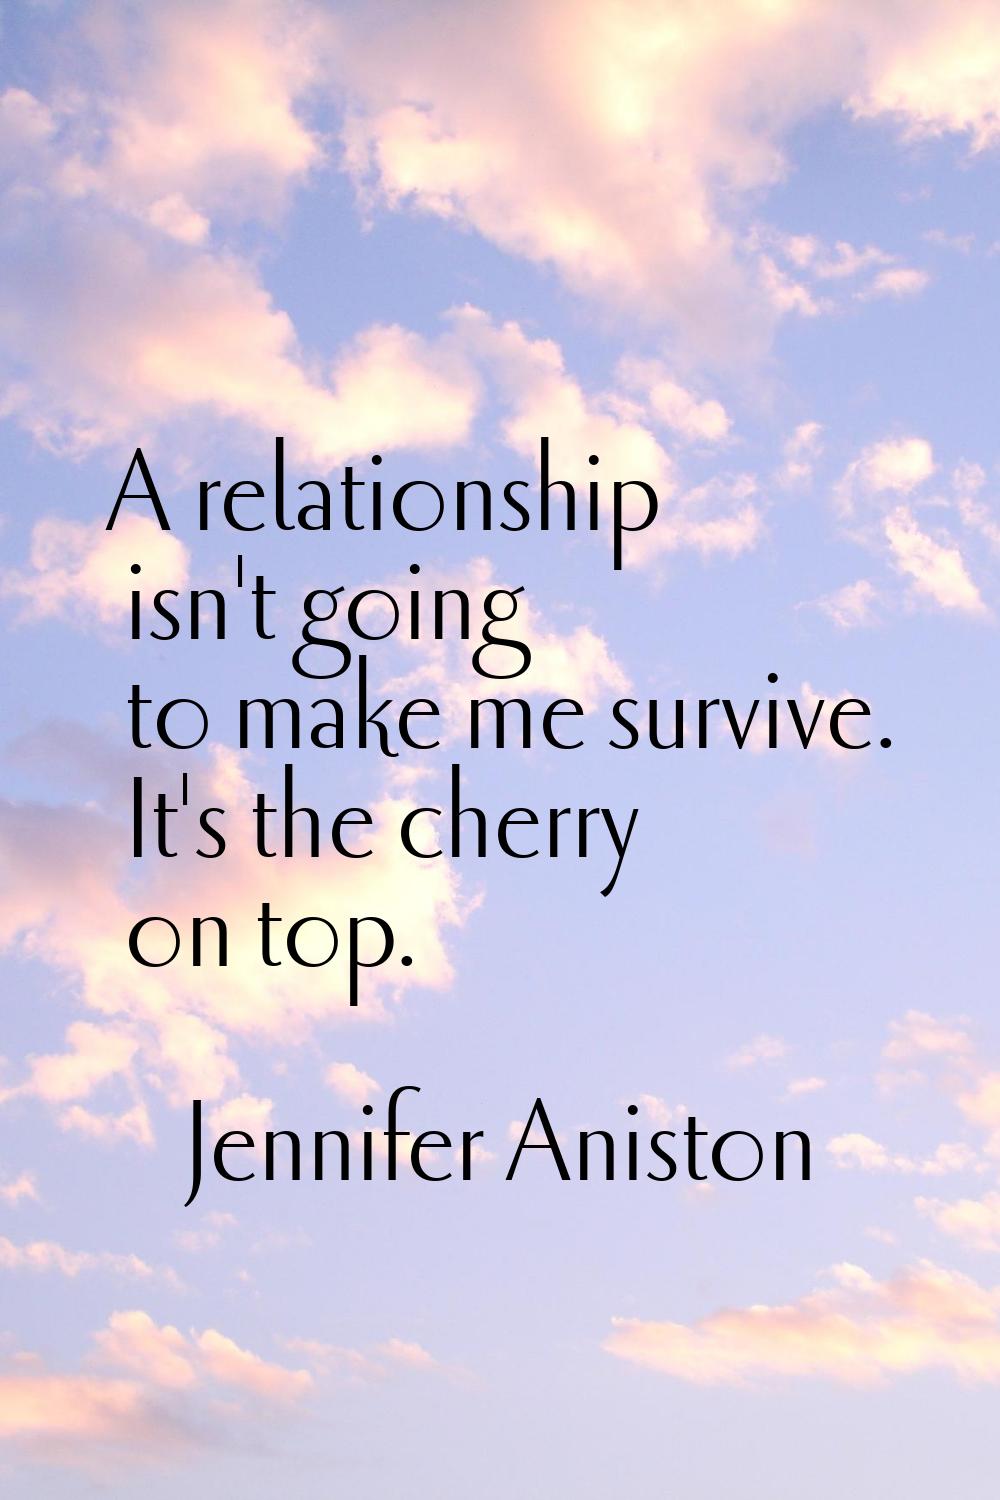 A relationship isn't going to make me survive. It's the cherry on top.